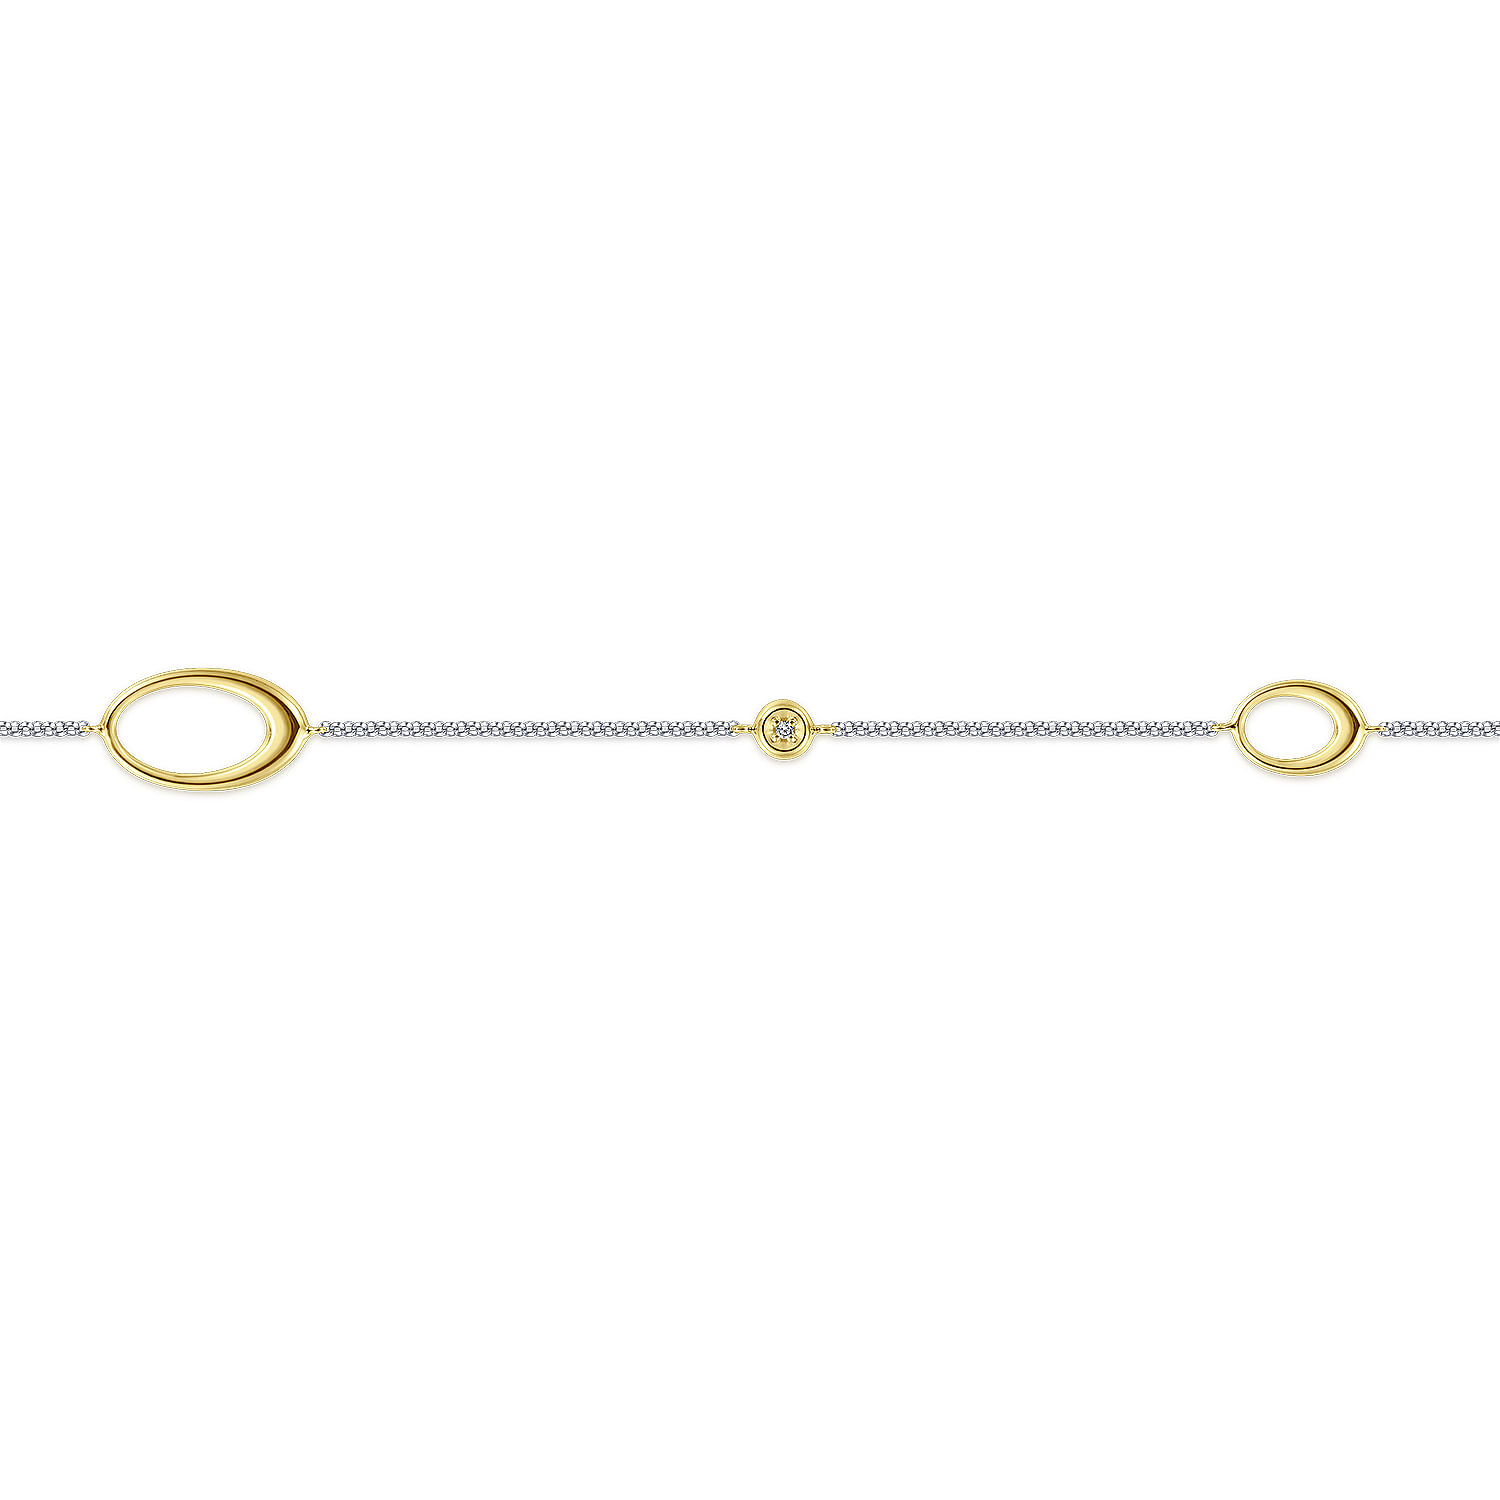 14K White-Yellow Gold Chain Ankle Bracelet with Oval Link Stations and Diamond Accents